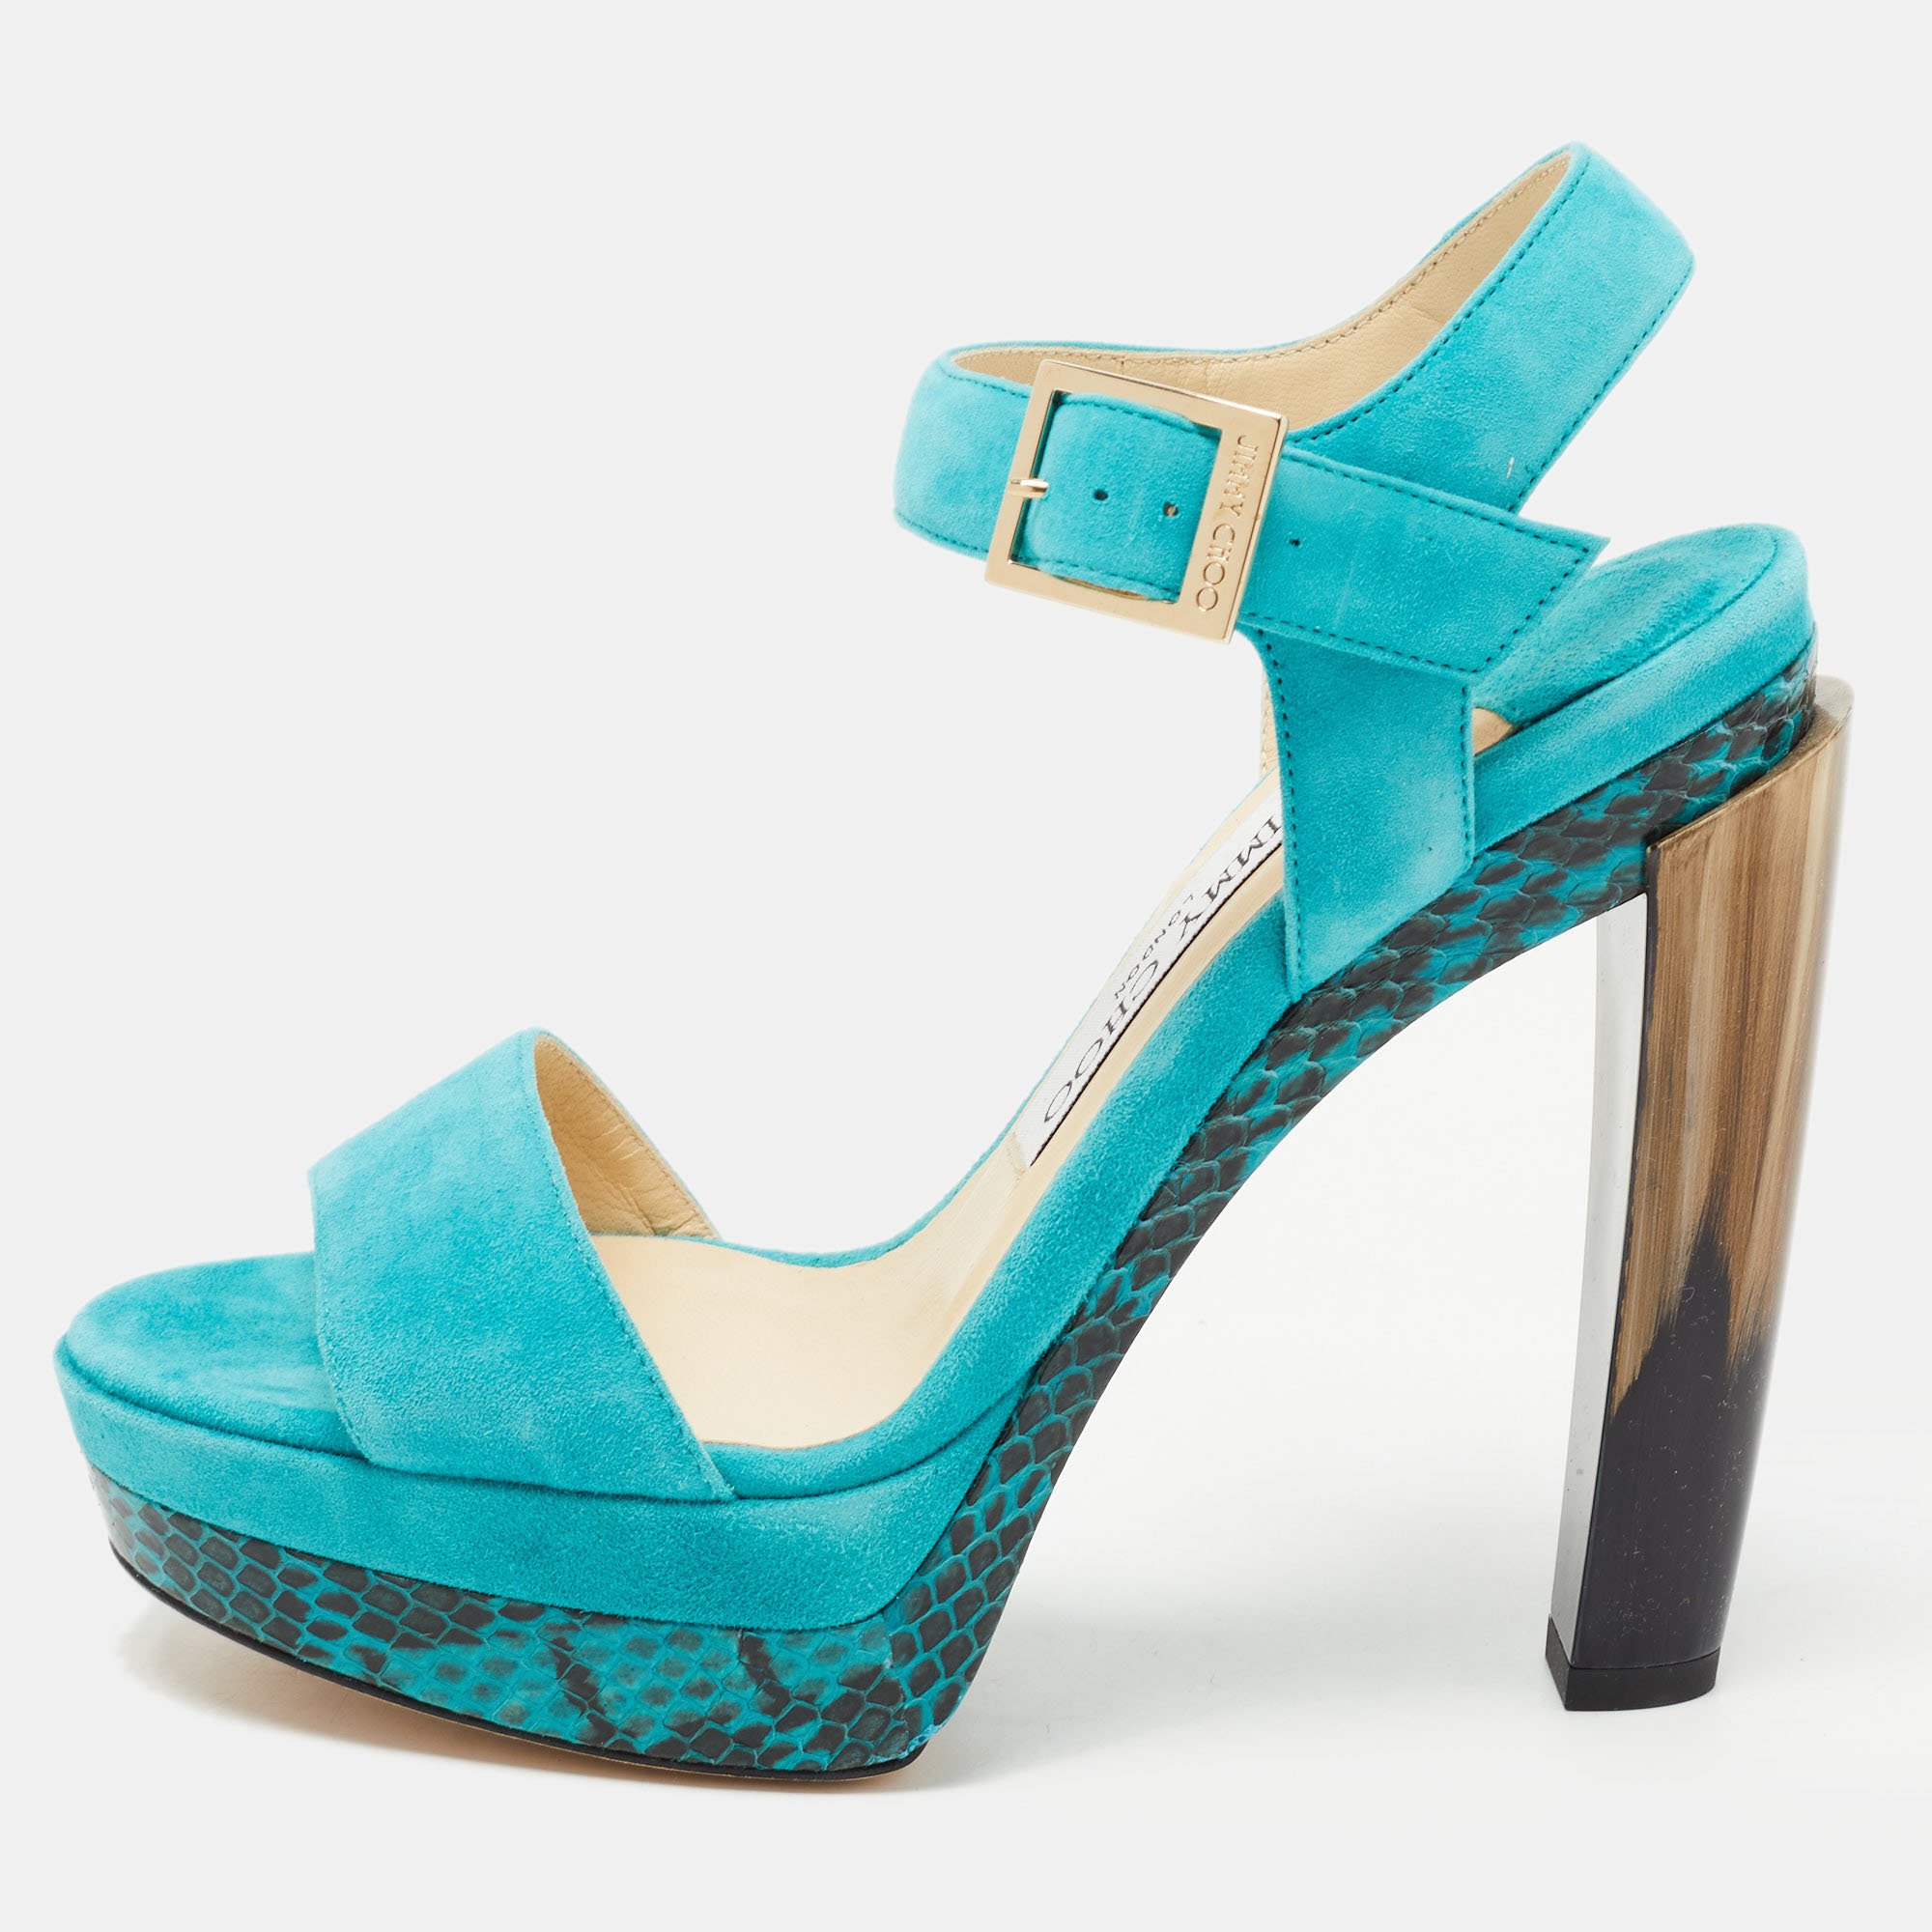 Jimmy choo turquoise blue suede and python leather dora platform ankle strap sandals size 36